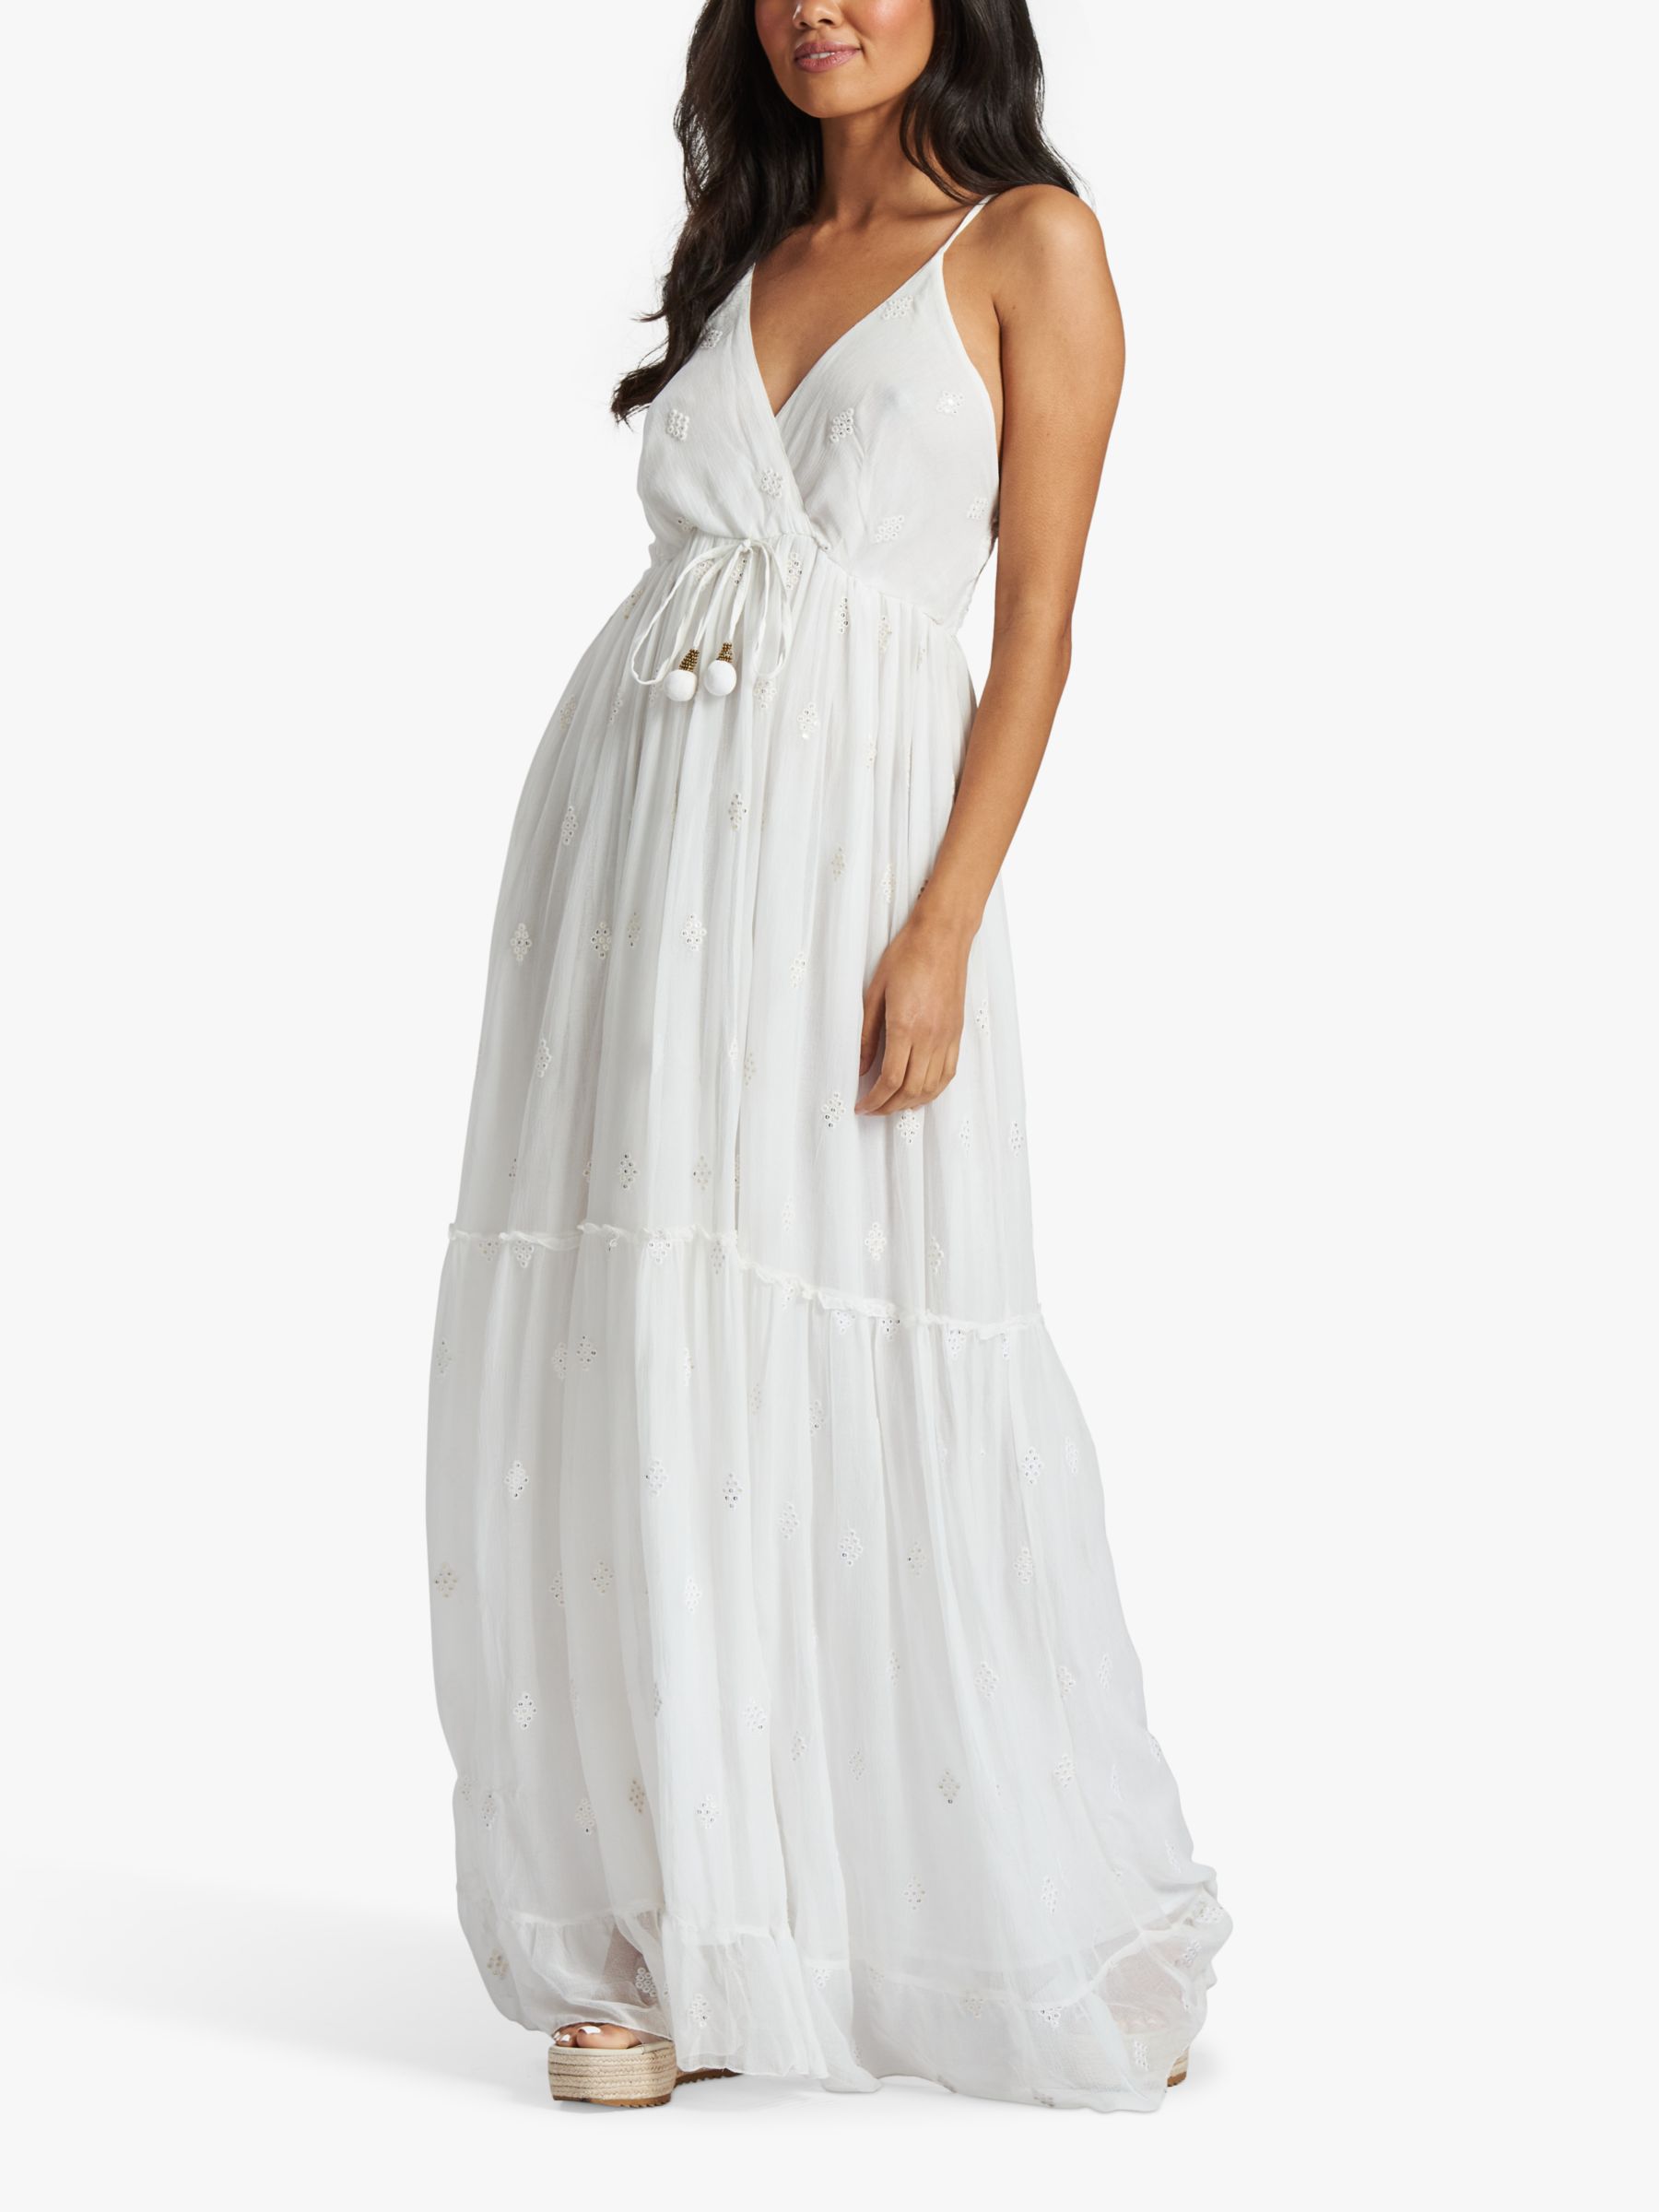 South Beach Sequin Detail Tiered Maxi Dress, White, 8